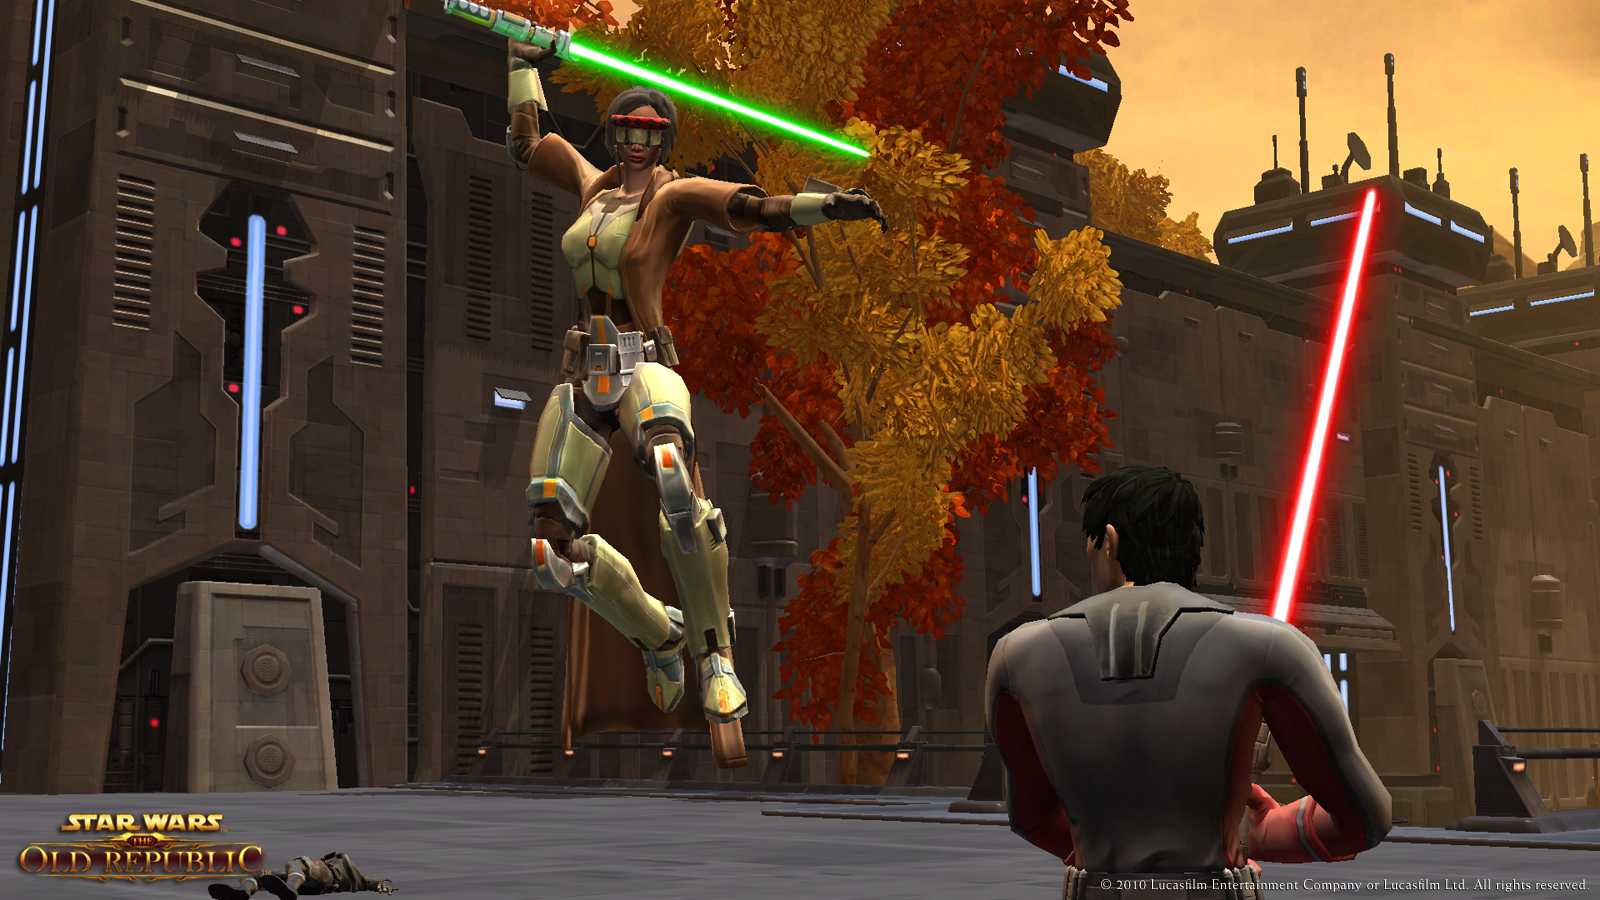 Star wars: knights of the old republic - pcgamingwiki pcgw - bugs, fixes, crashes, mods, guides and improvements for every pc game